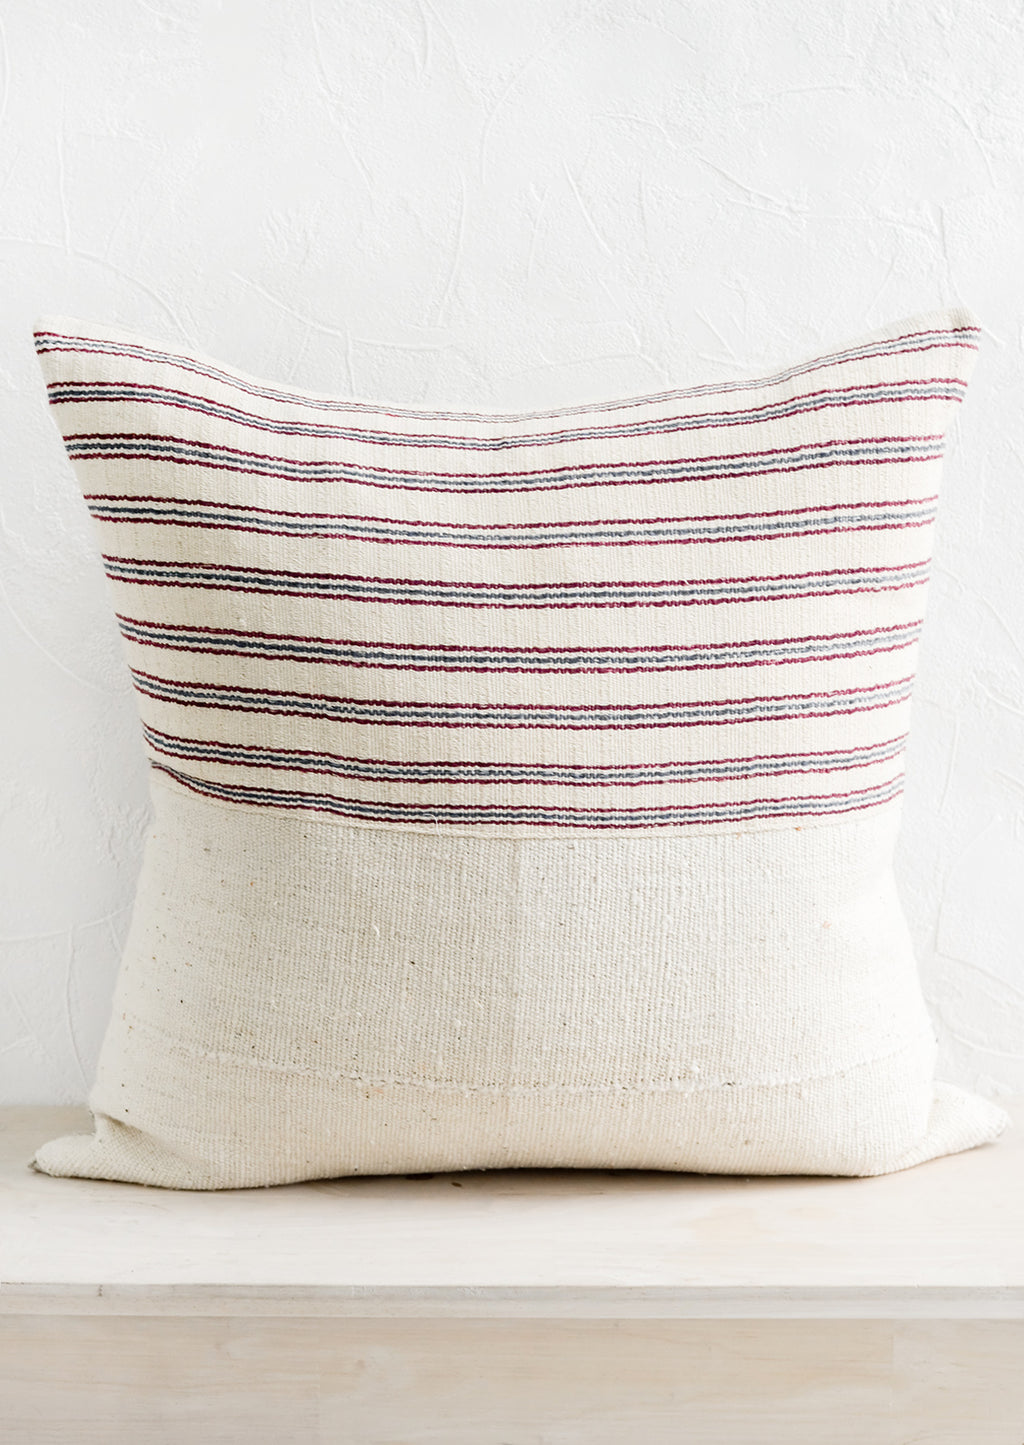 2: A throw pillow with top half in ivory, red and blue striped fabric and bottom half in natural mudcloth.